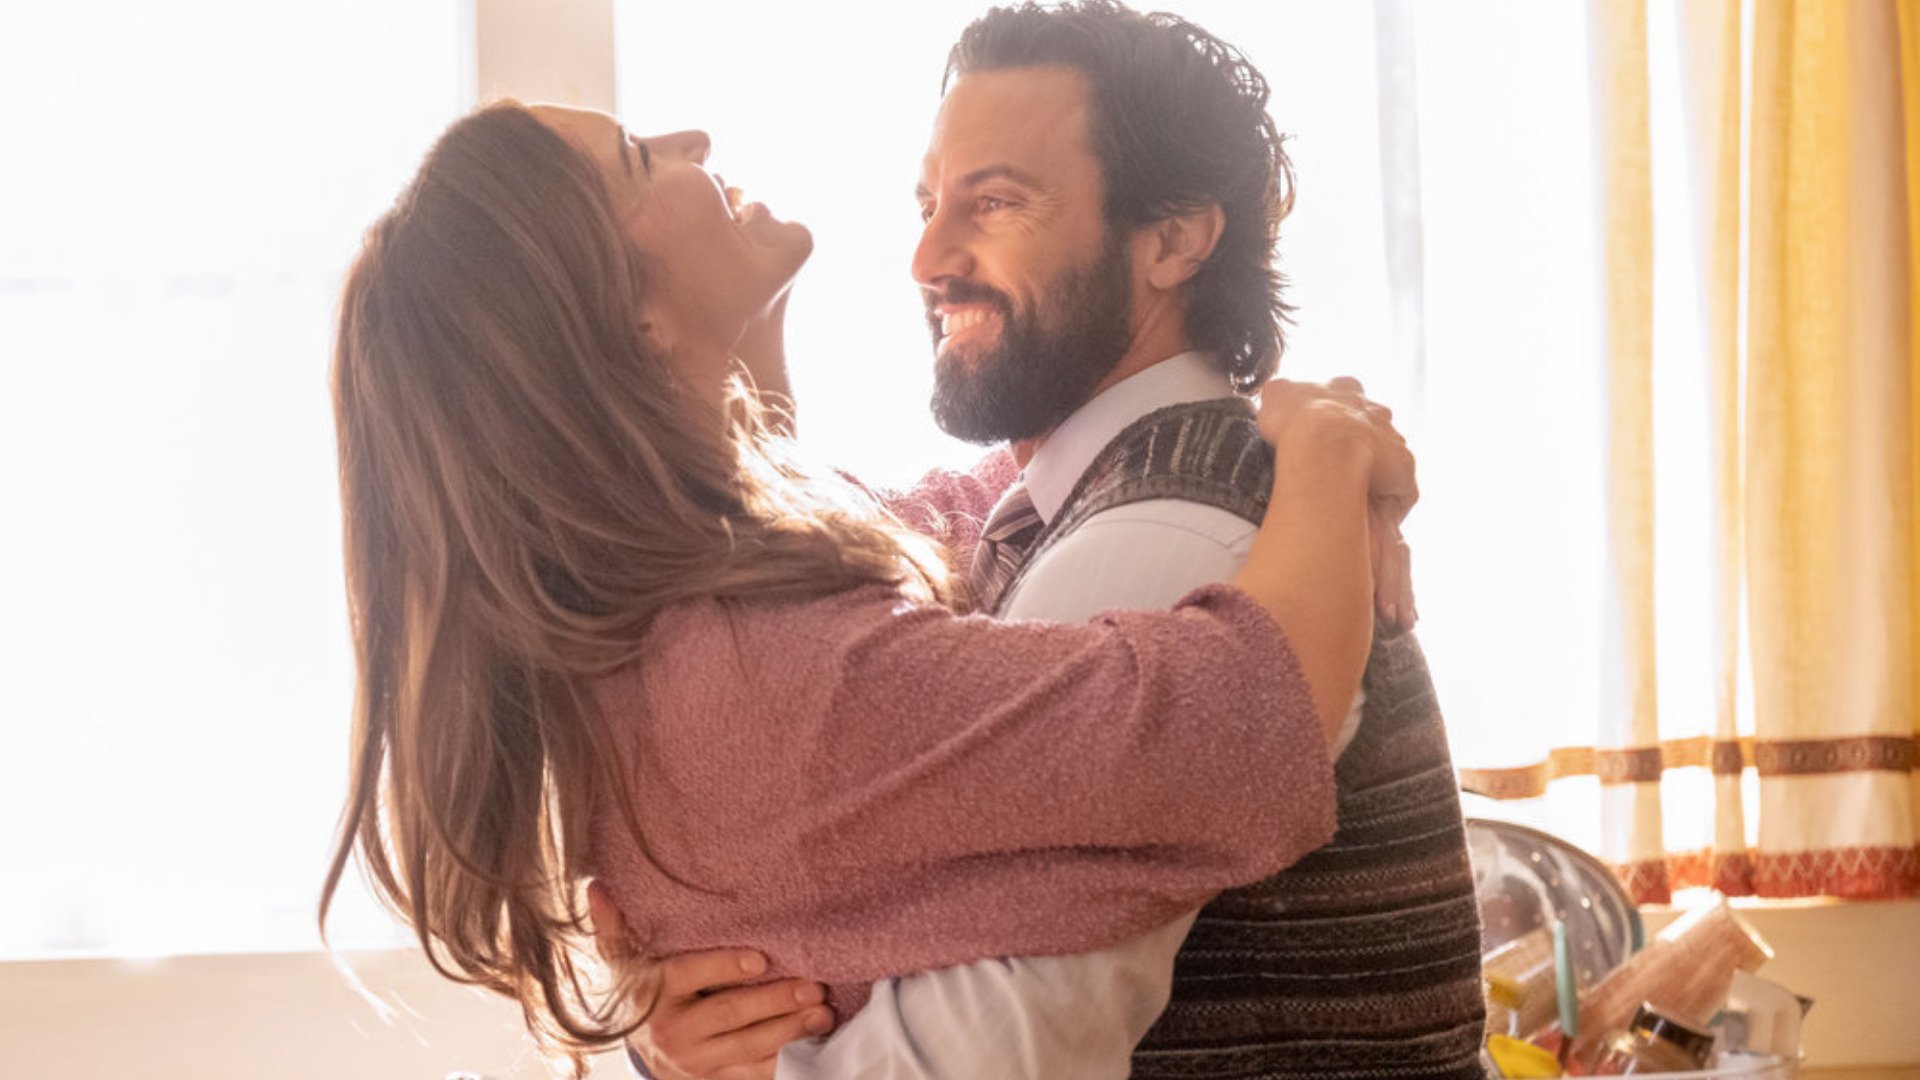 Mandy Moore as Rebecca and Milo Ventimiglia as Jack dancing in ‘This Is Us’ Season 6 Episode 1 hugging each other and smiling